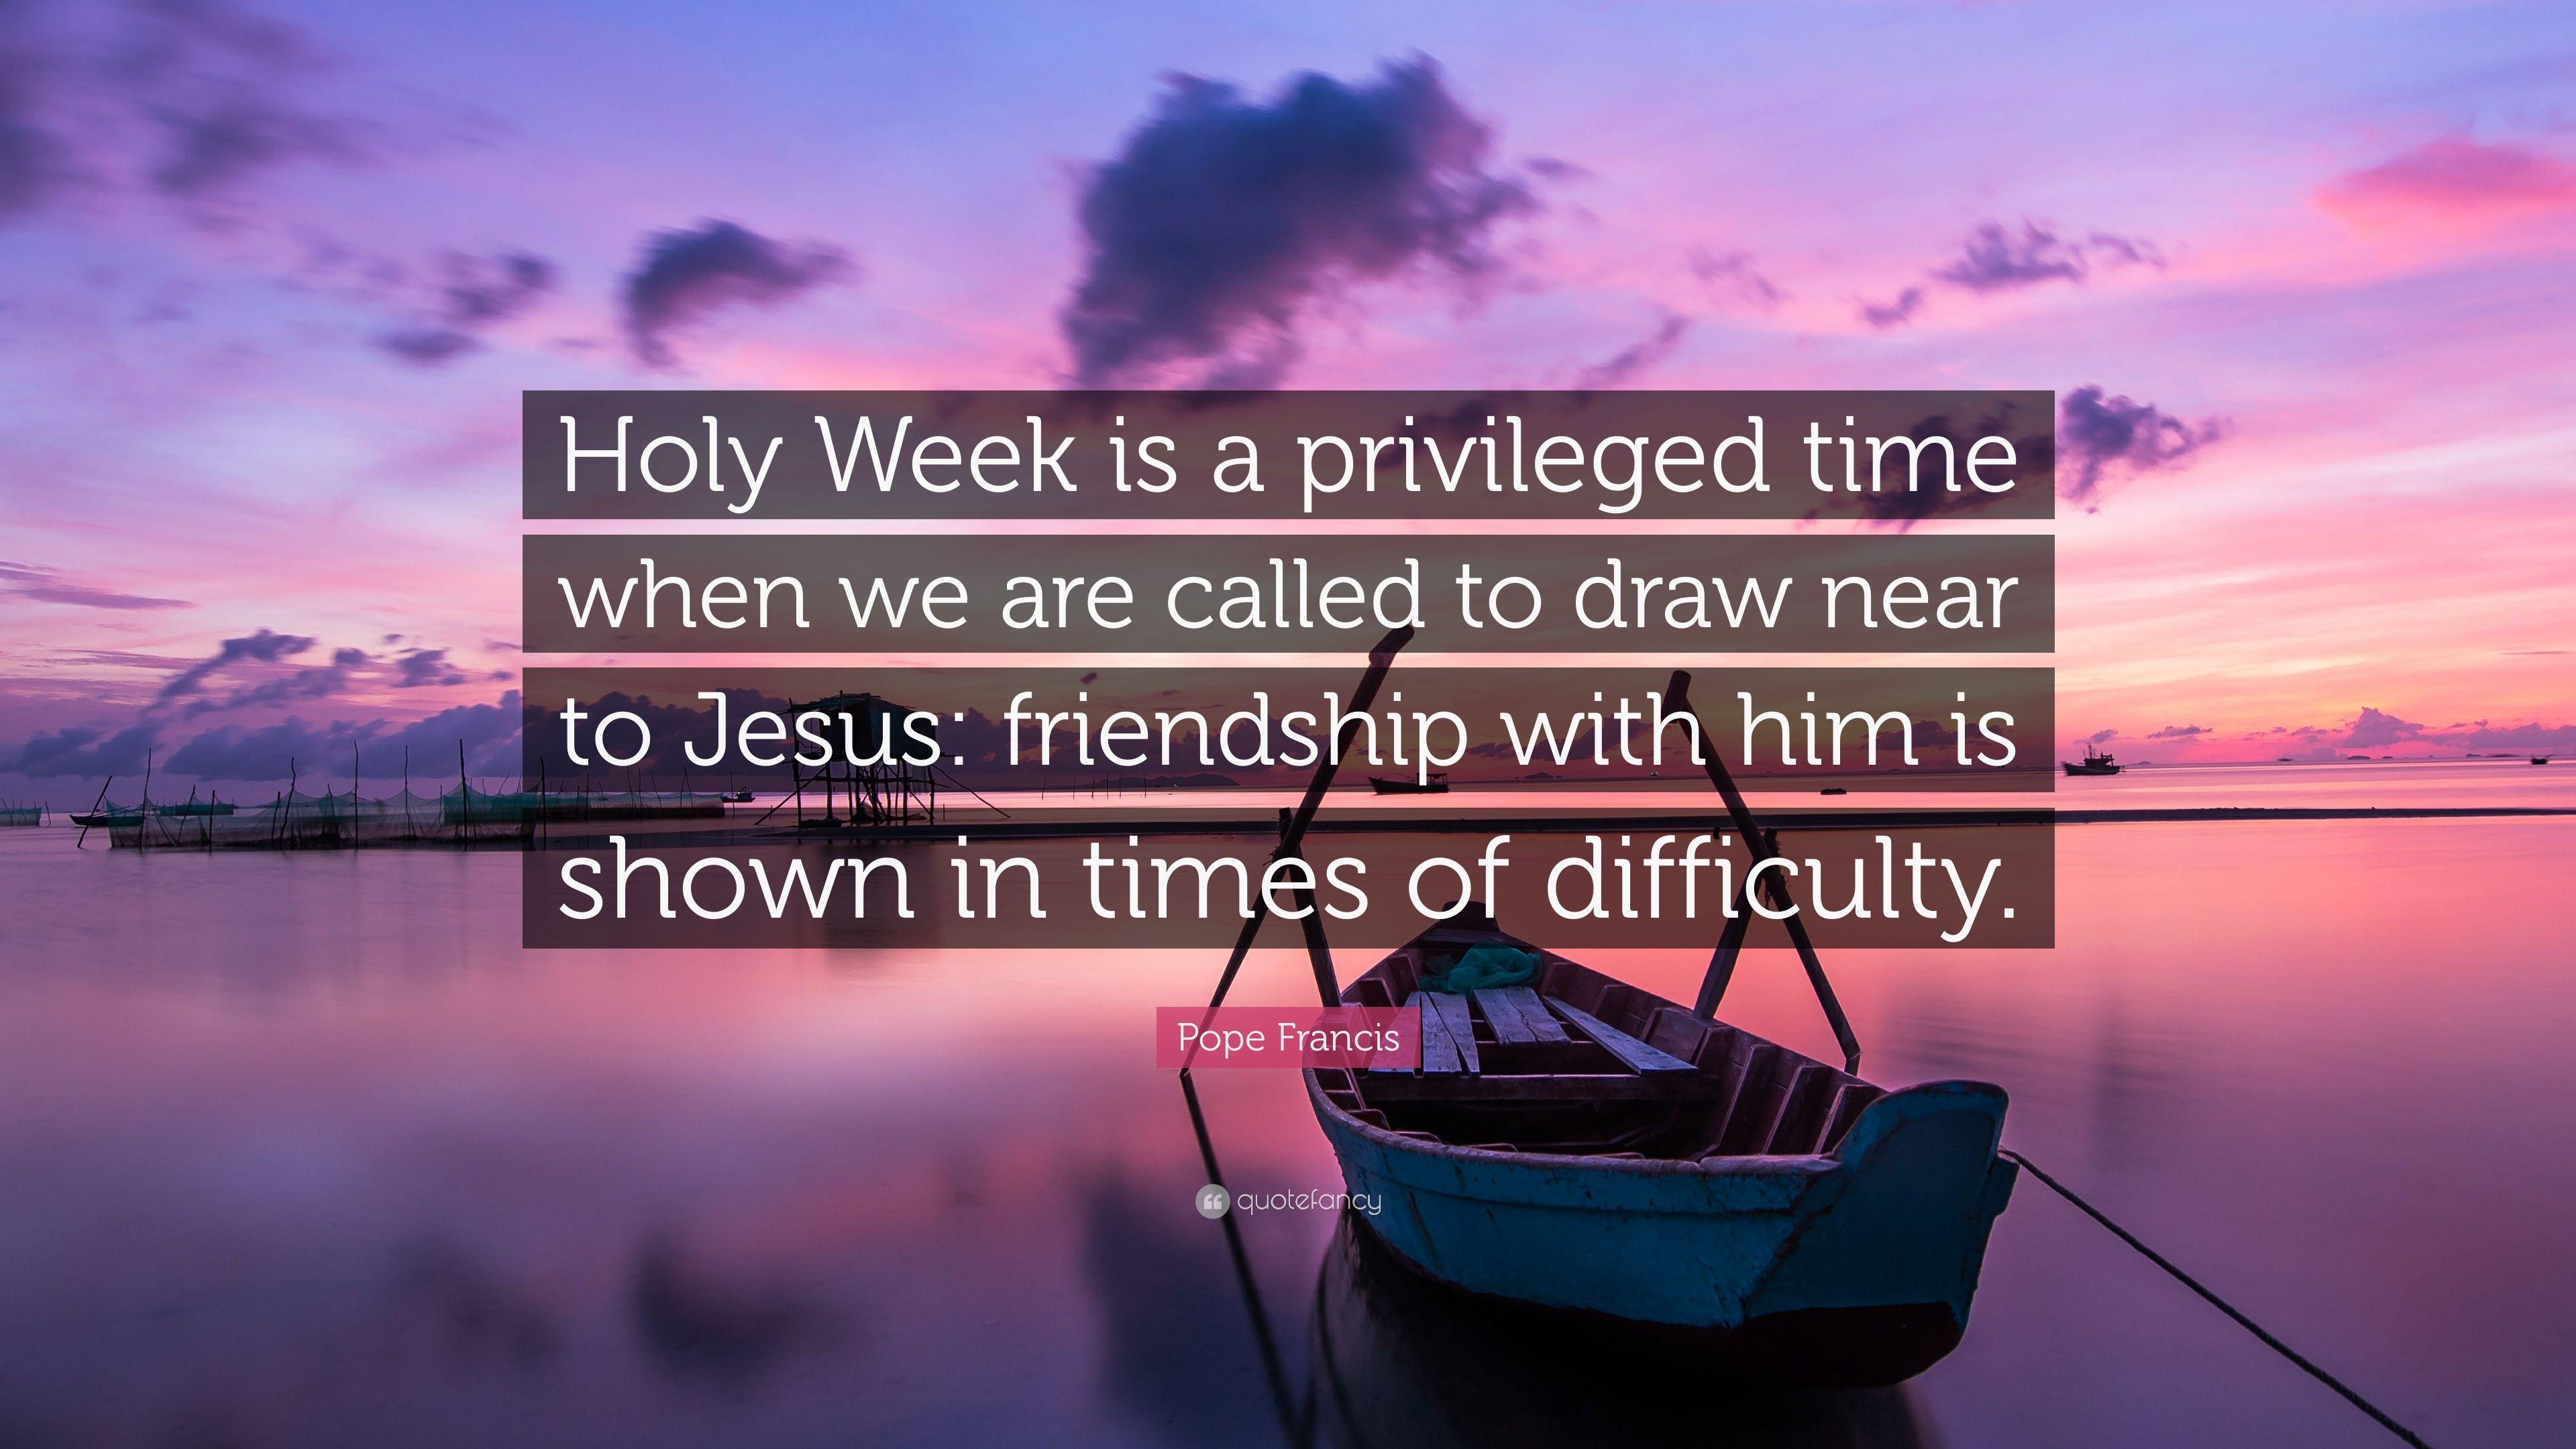 Pope Francis Quote: “Holy Week is a privileged time when we are